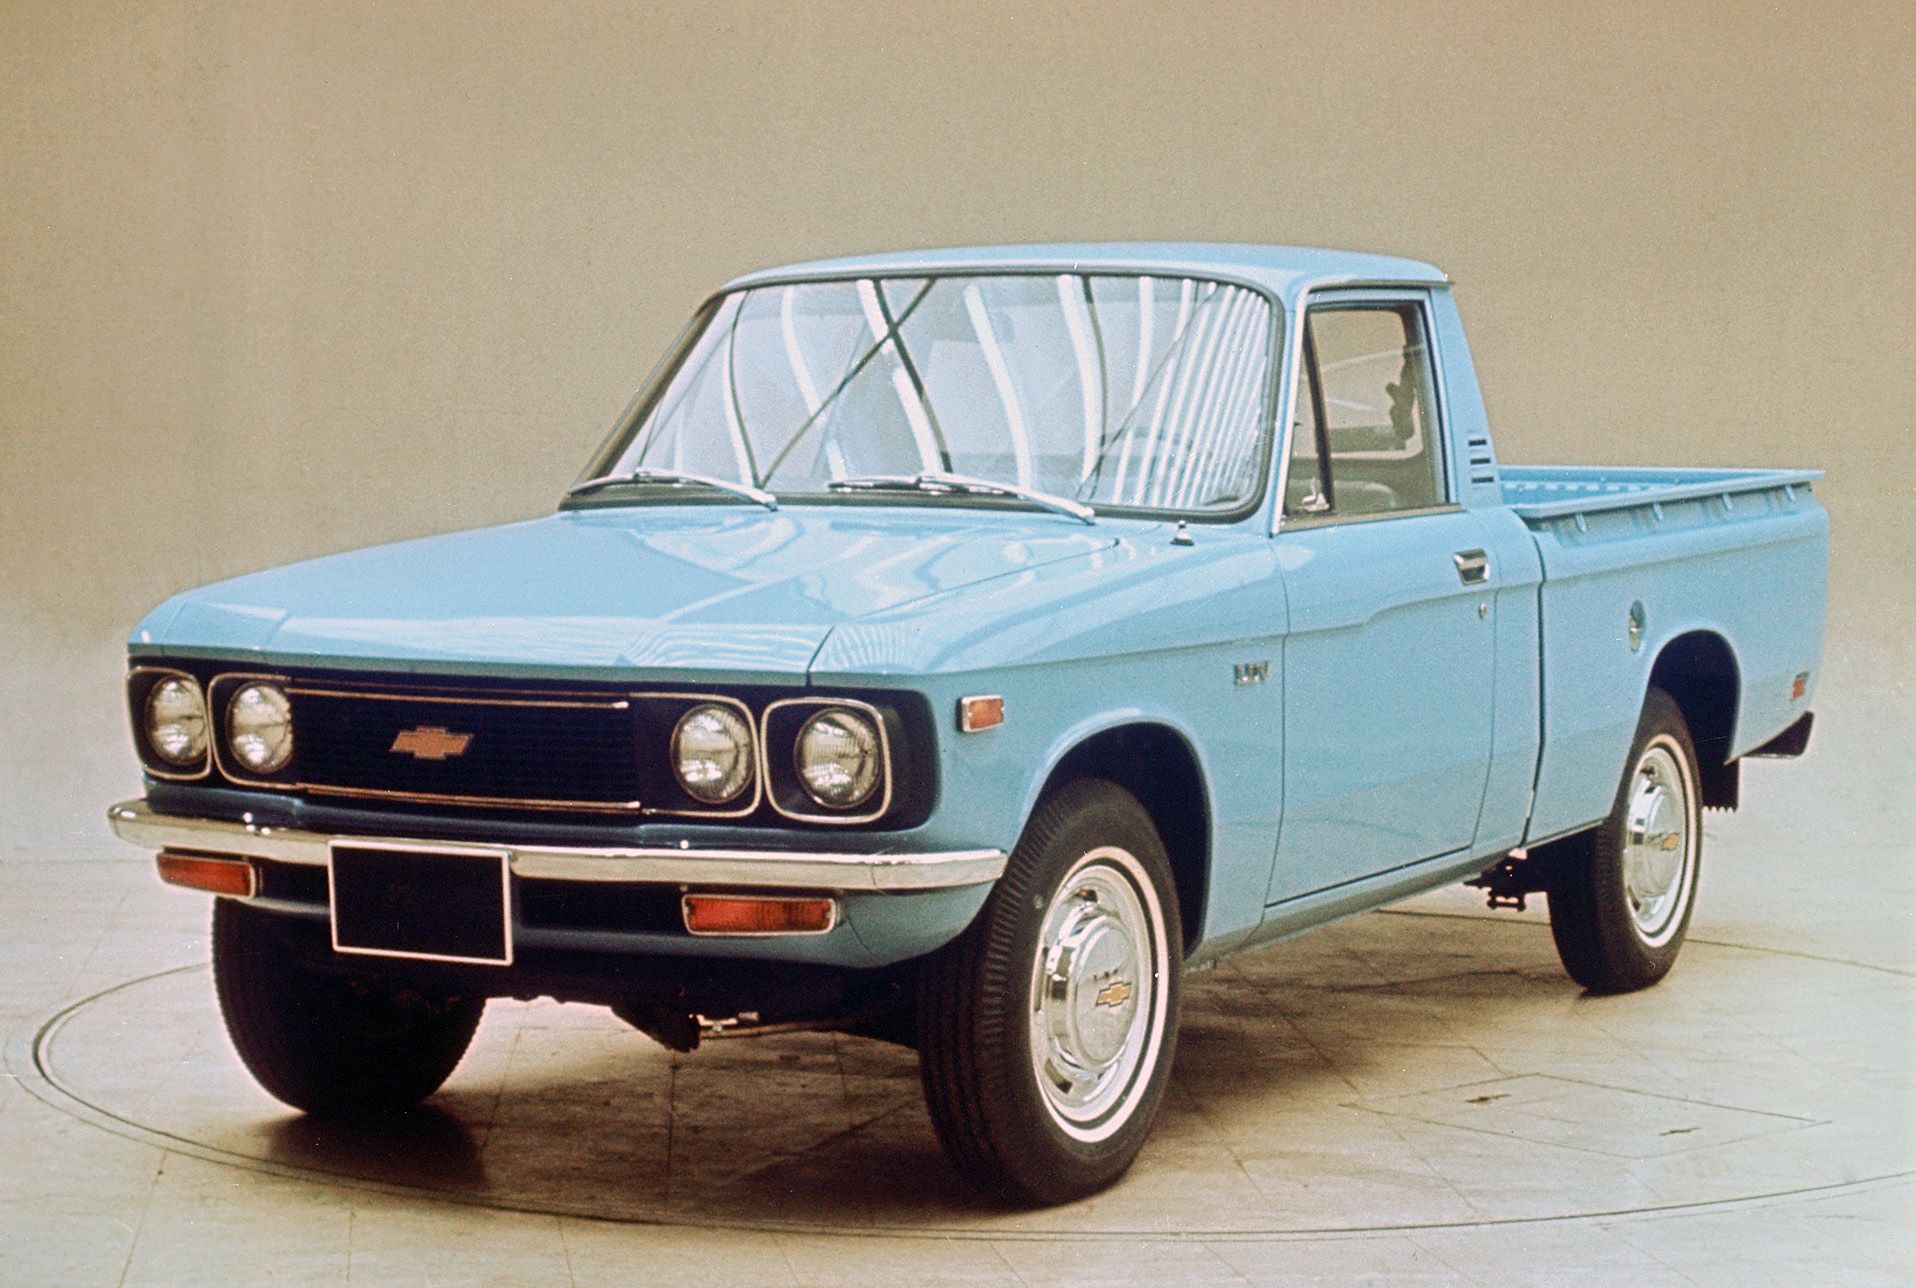 Blue Chevy Luv with beige wall background